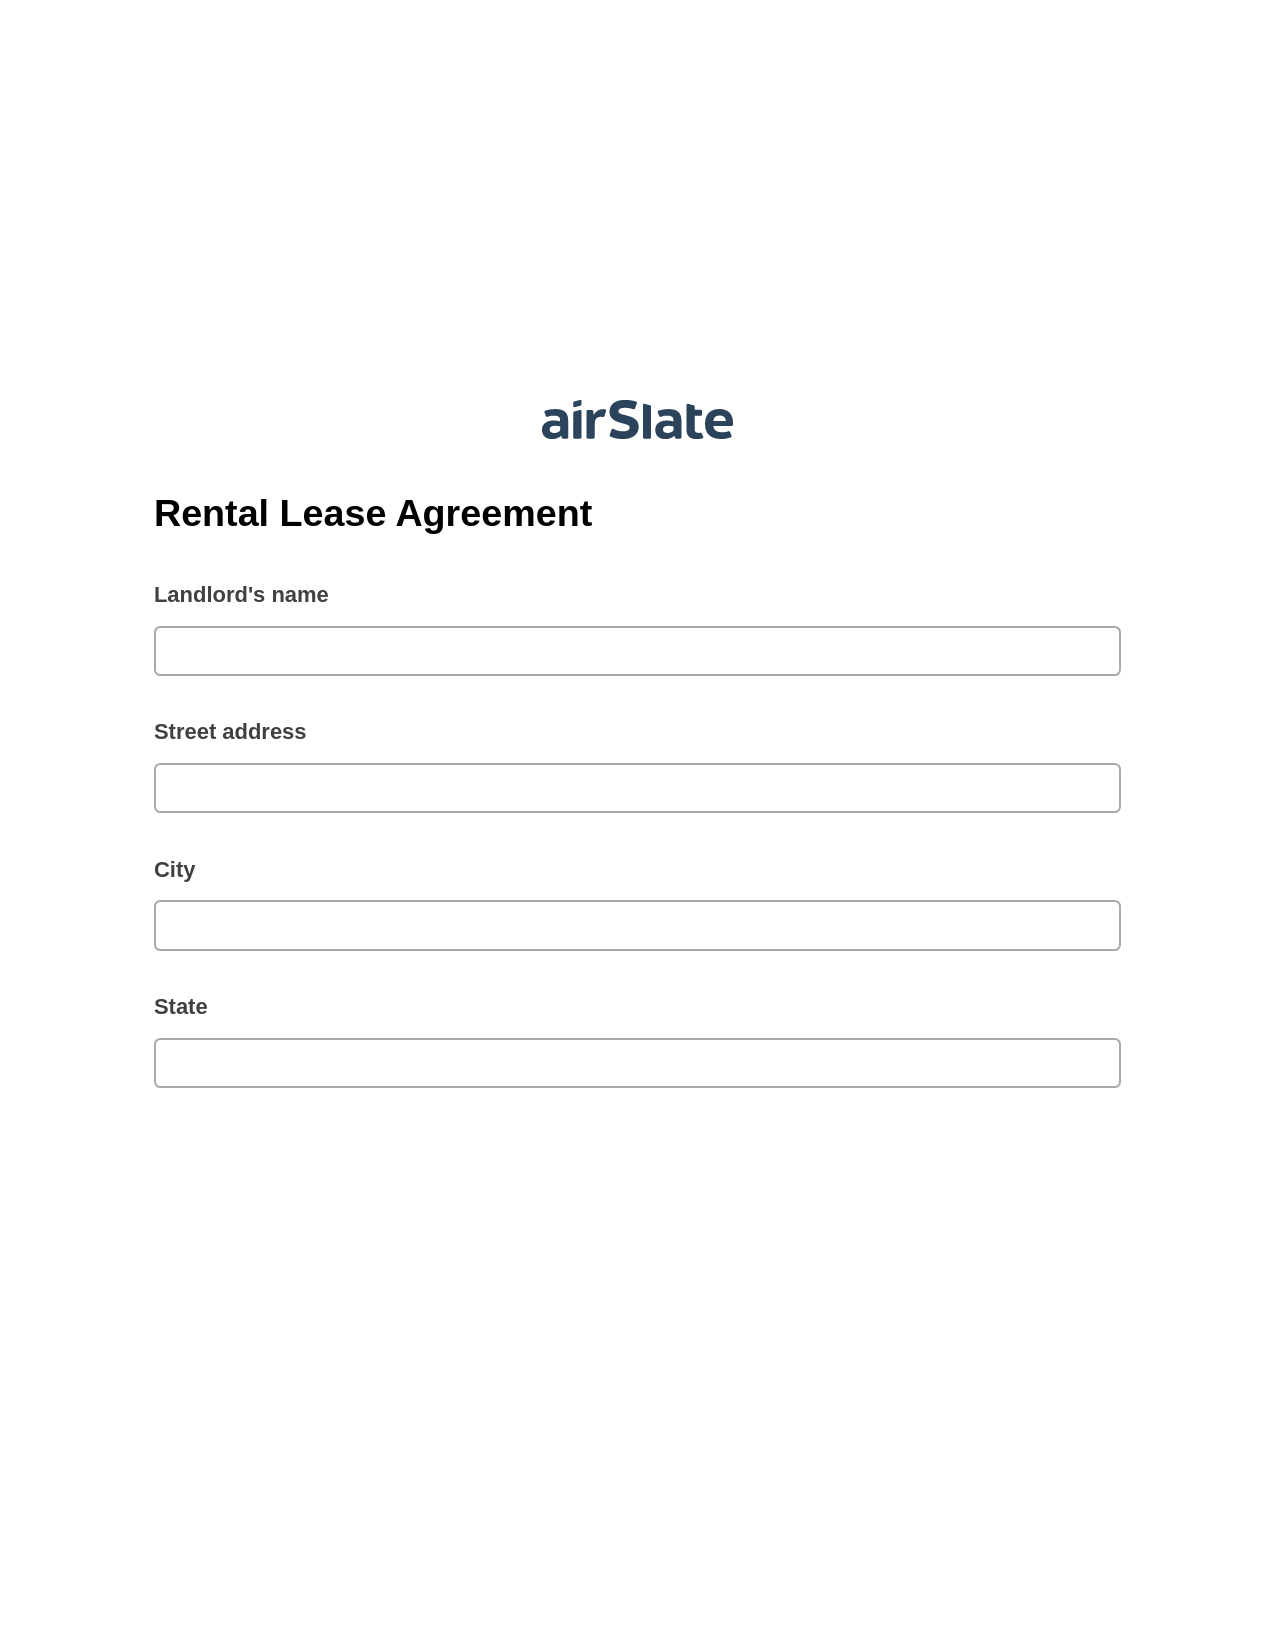 Rental Lease Agreement Pre-fill from Google Sheet Dropdown Options Bot, Invoke Salesforce Process Bot, Export to NetSuite Record Bot